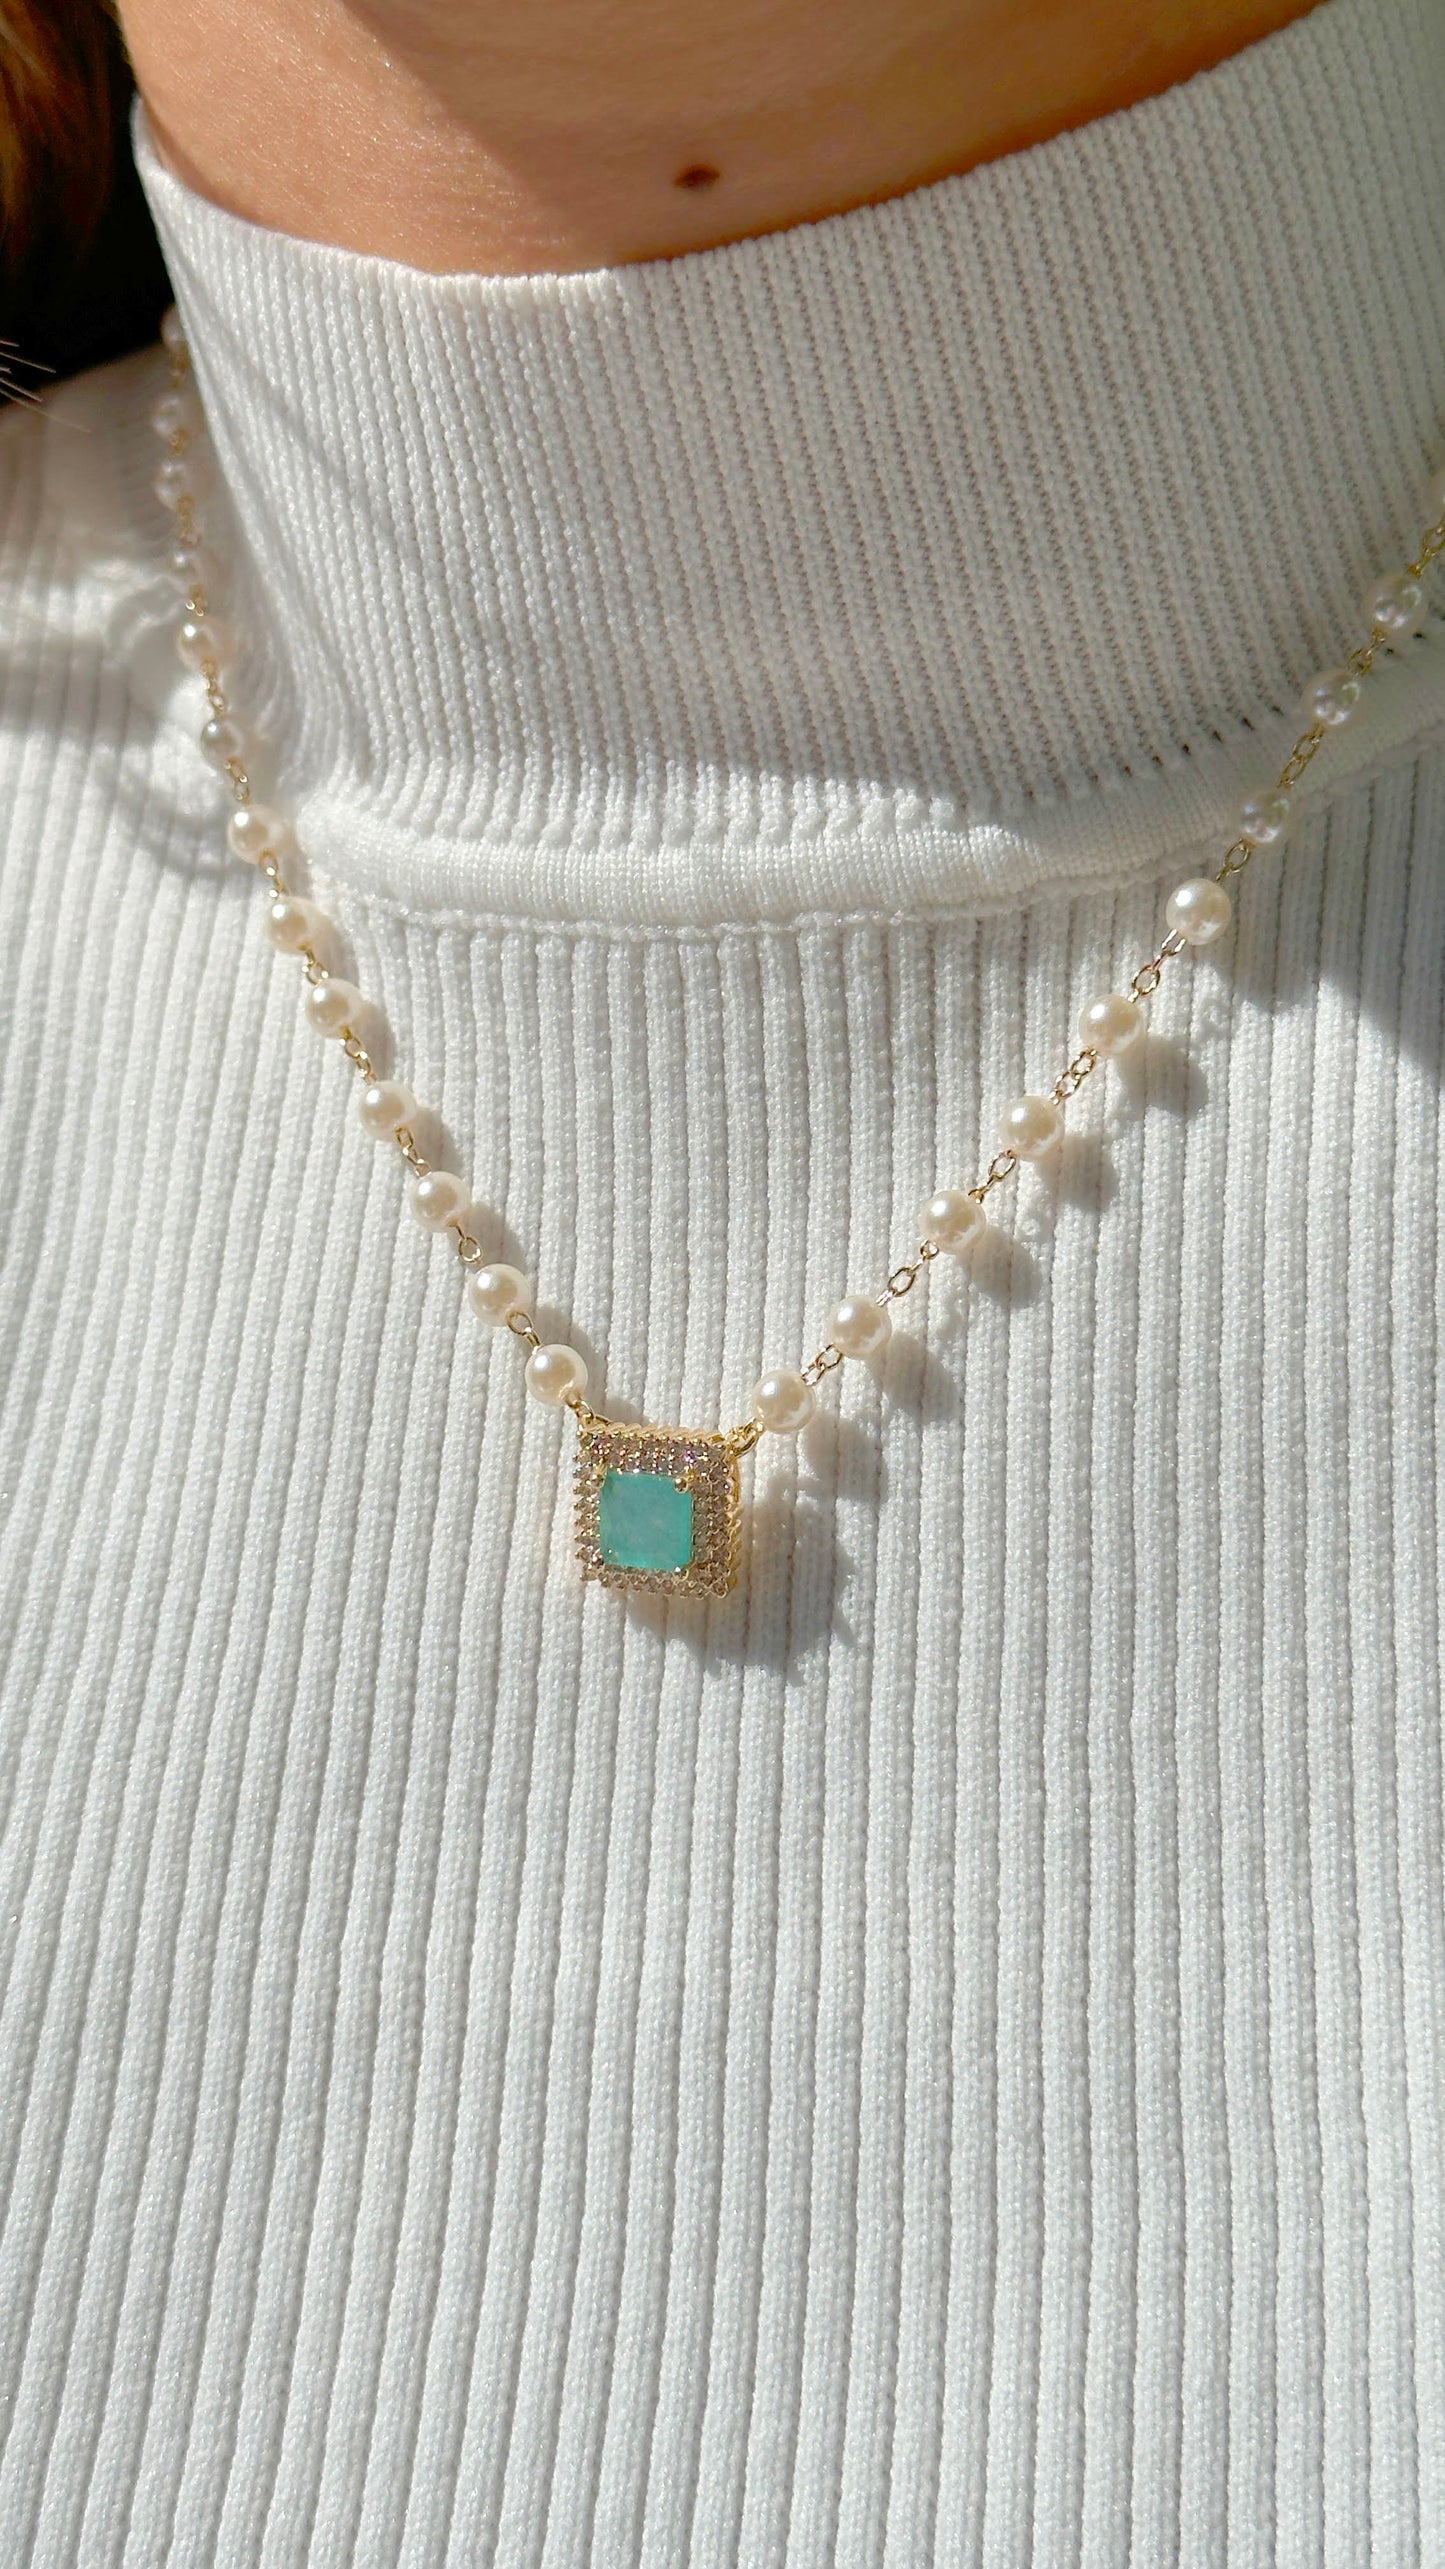 18K gold plated "frame" necklace with tourmaline fusion and pearls on the chain